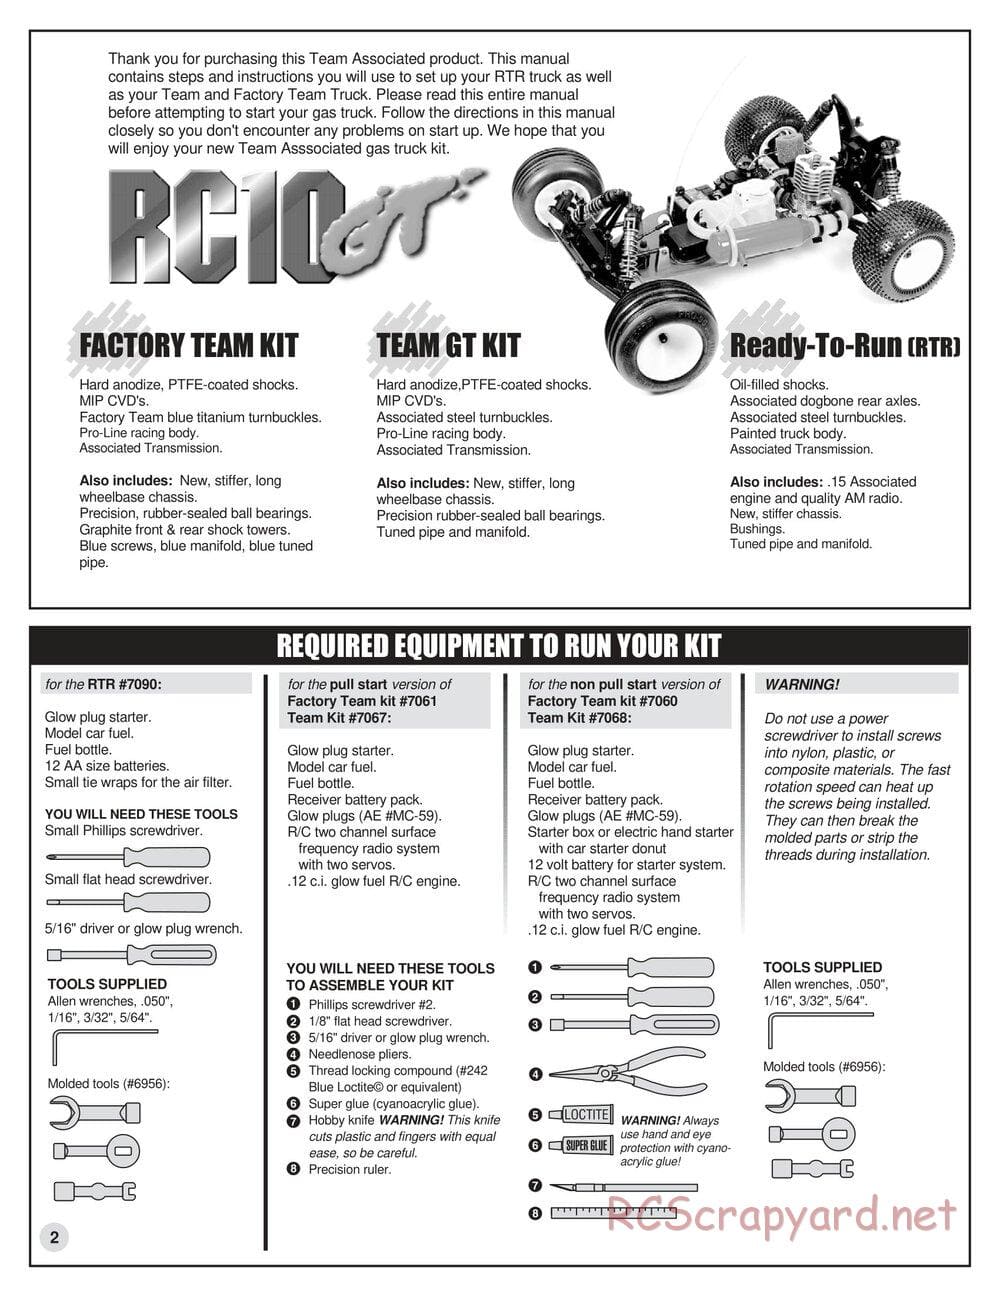 Team Associated - RC10GT (2000) - Manual - Page 2